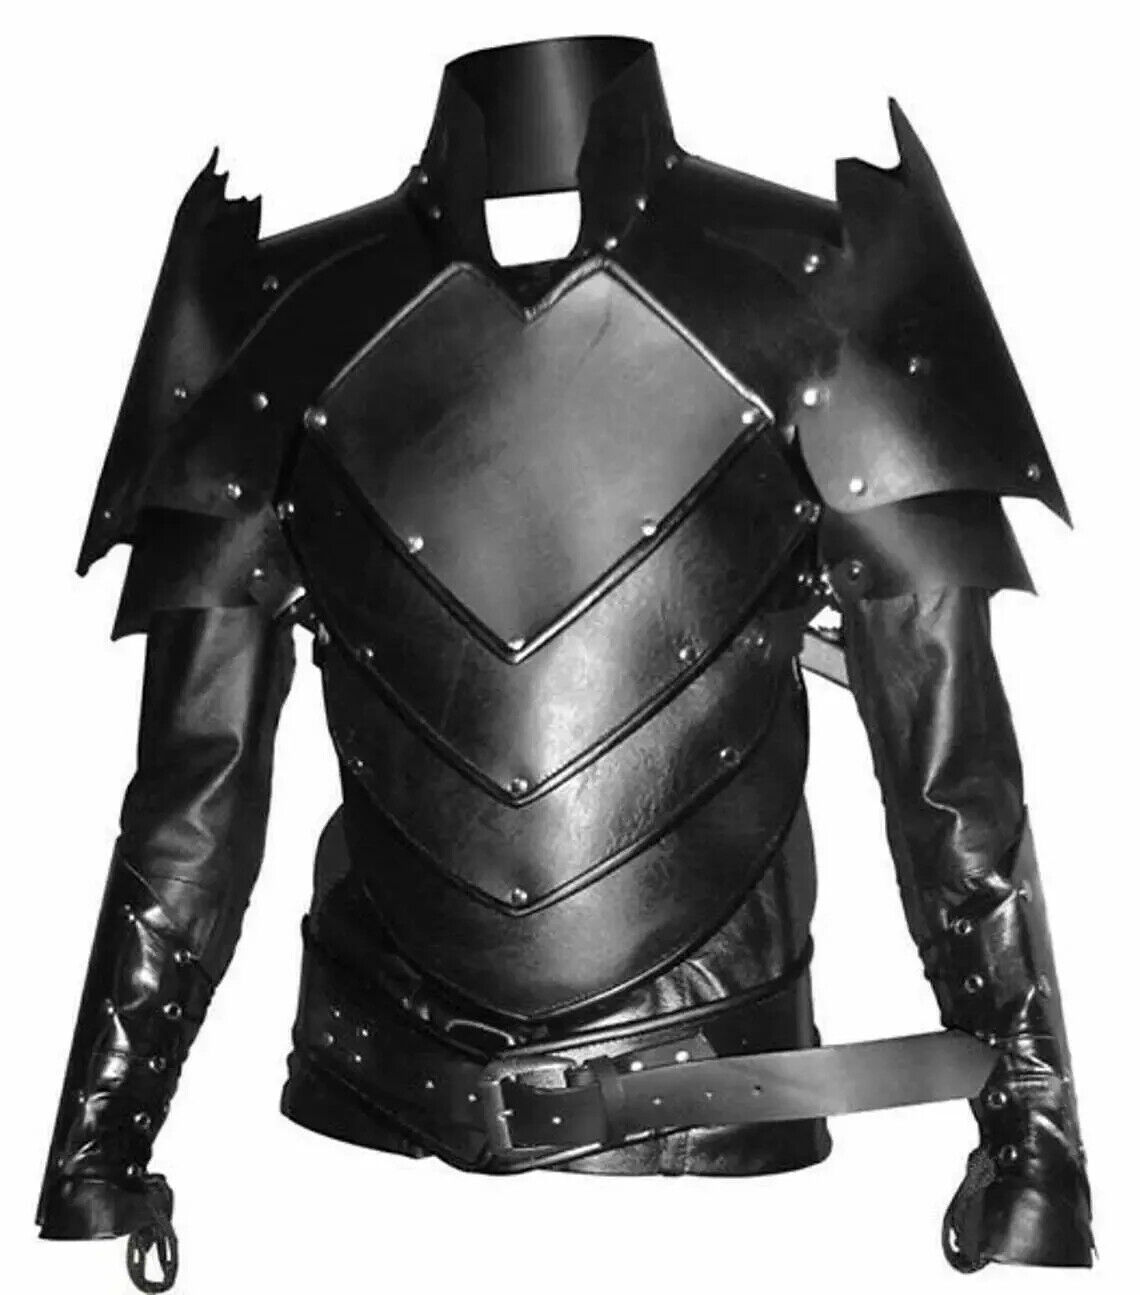 Real leather Armor Medieval Fantasy Larp Dress Halloween Costume Leather Armor